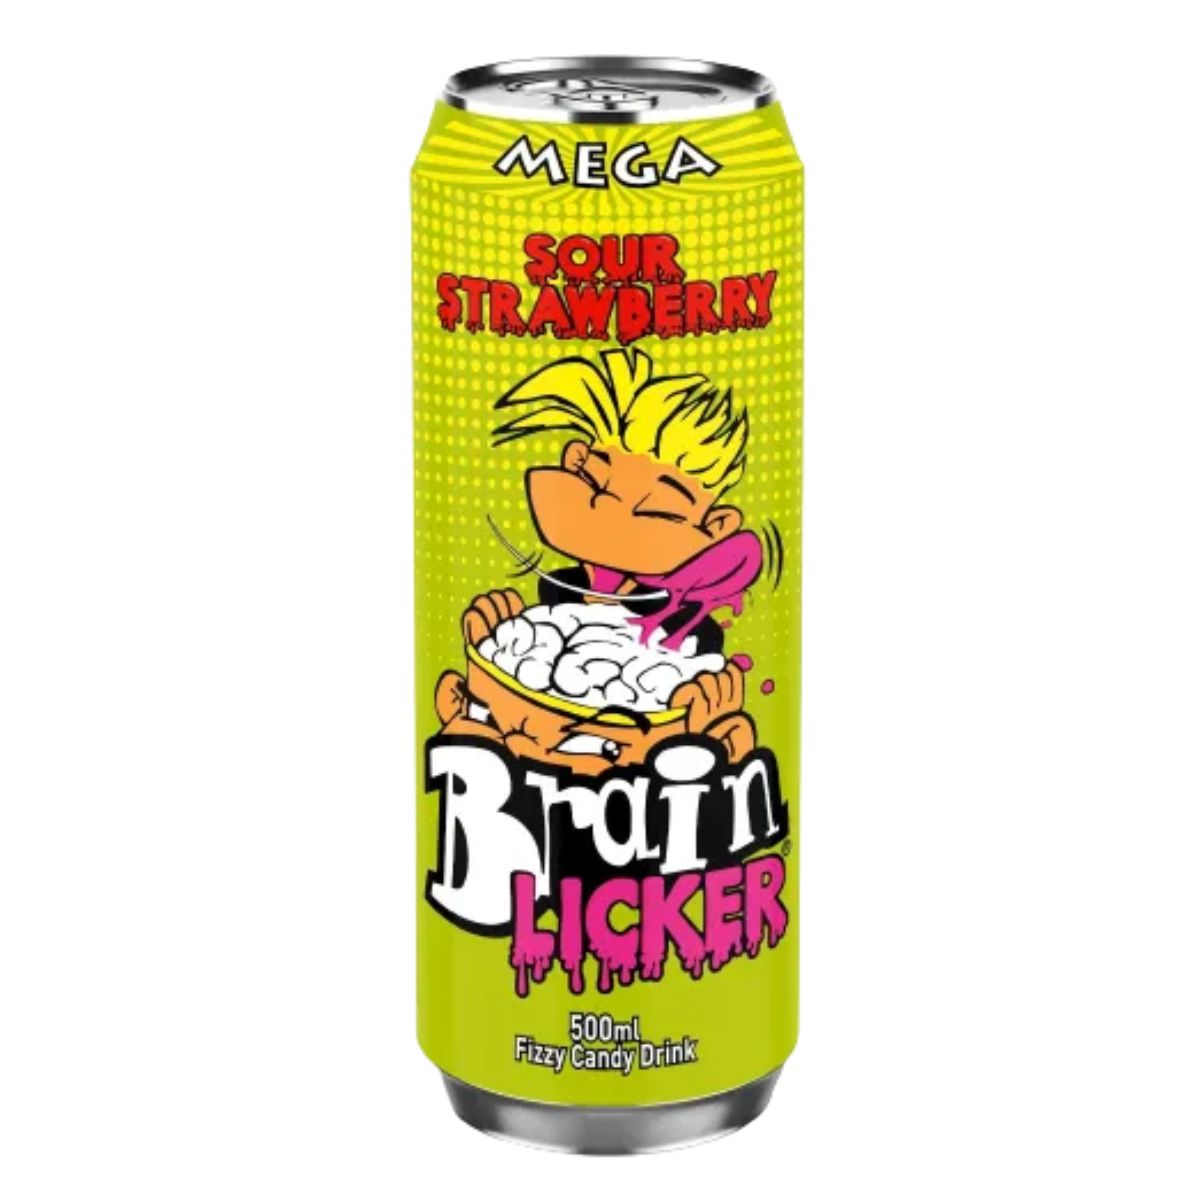 A can of Brain Licker - Sour Fizzy Candy Drink Strawberry - 500ml with a cartoon character on it.